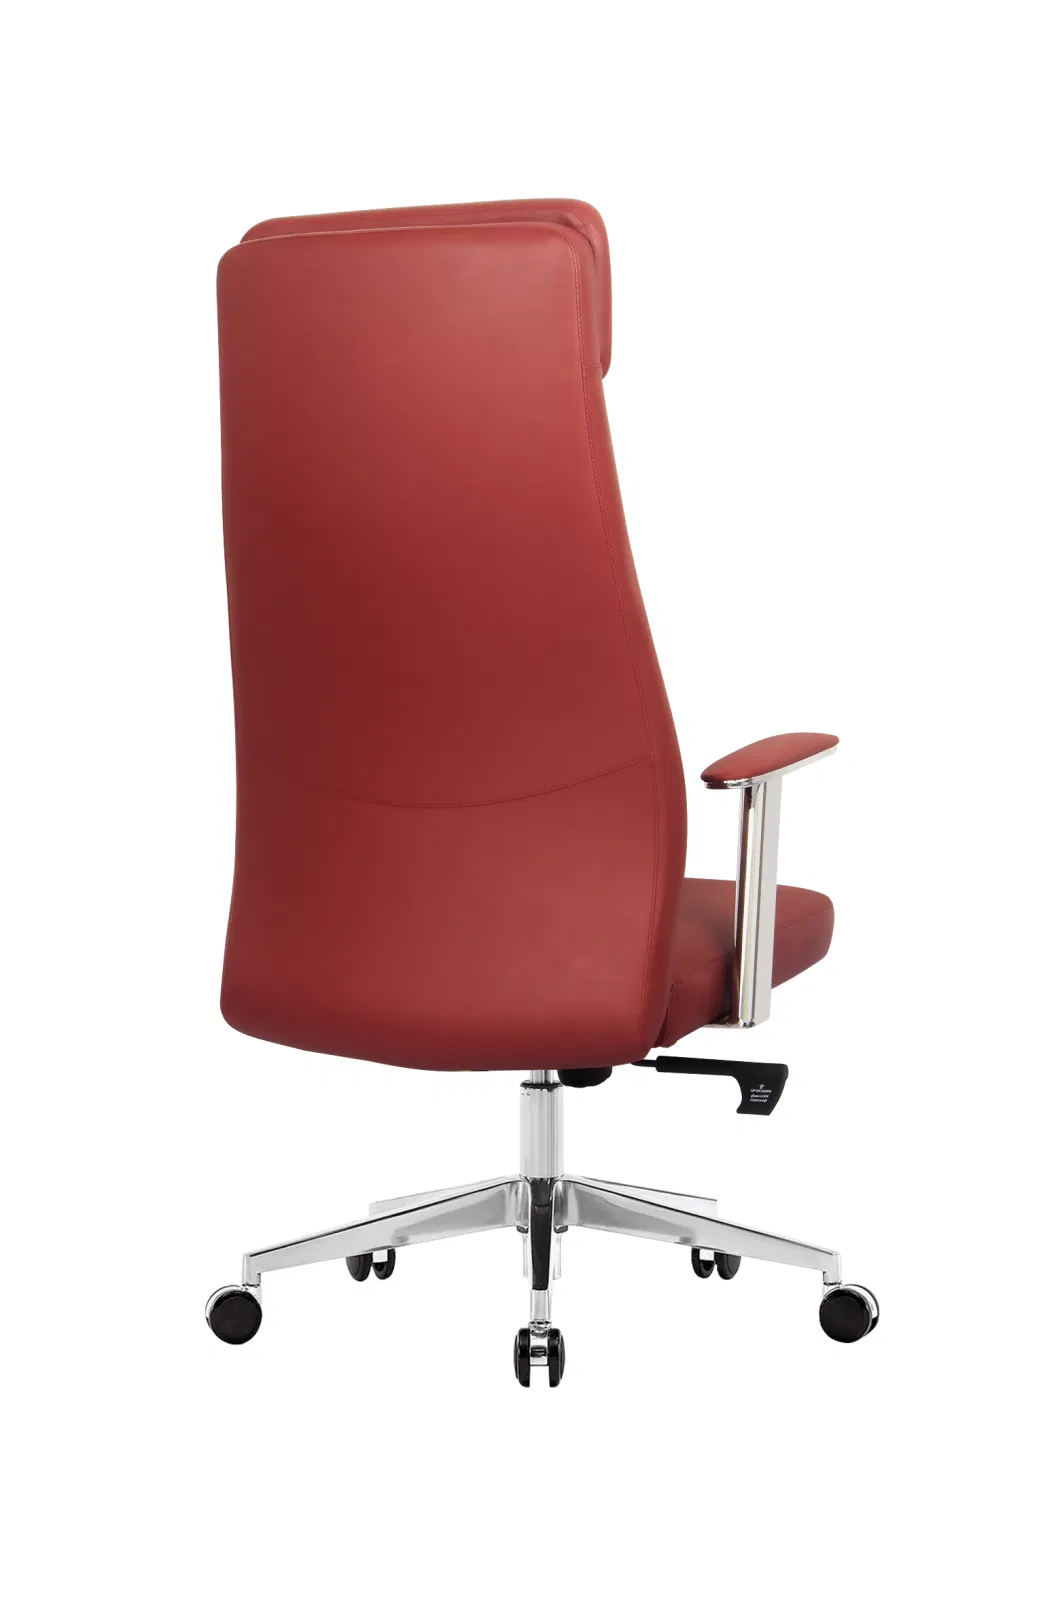 Wholesale High Quality Luxury Ergonomic Aniline PU Cow Leather Modern Computer Office Executive Chairs